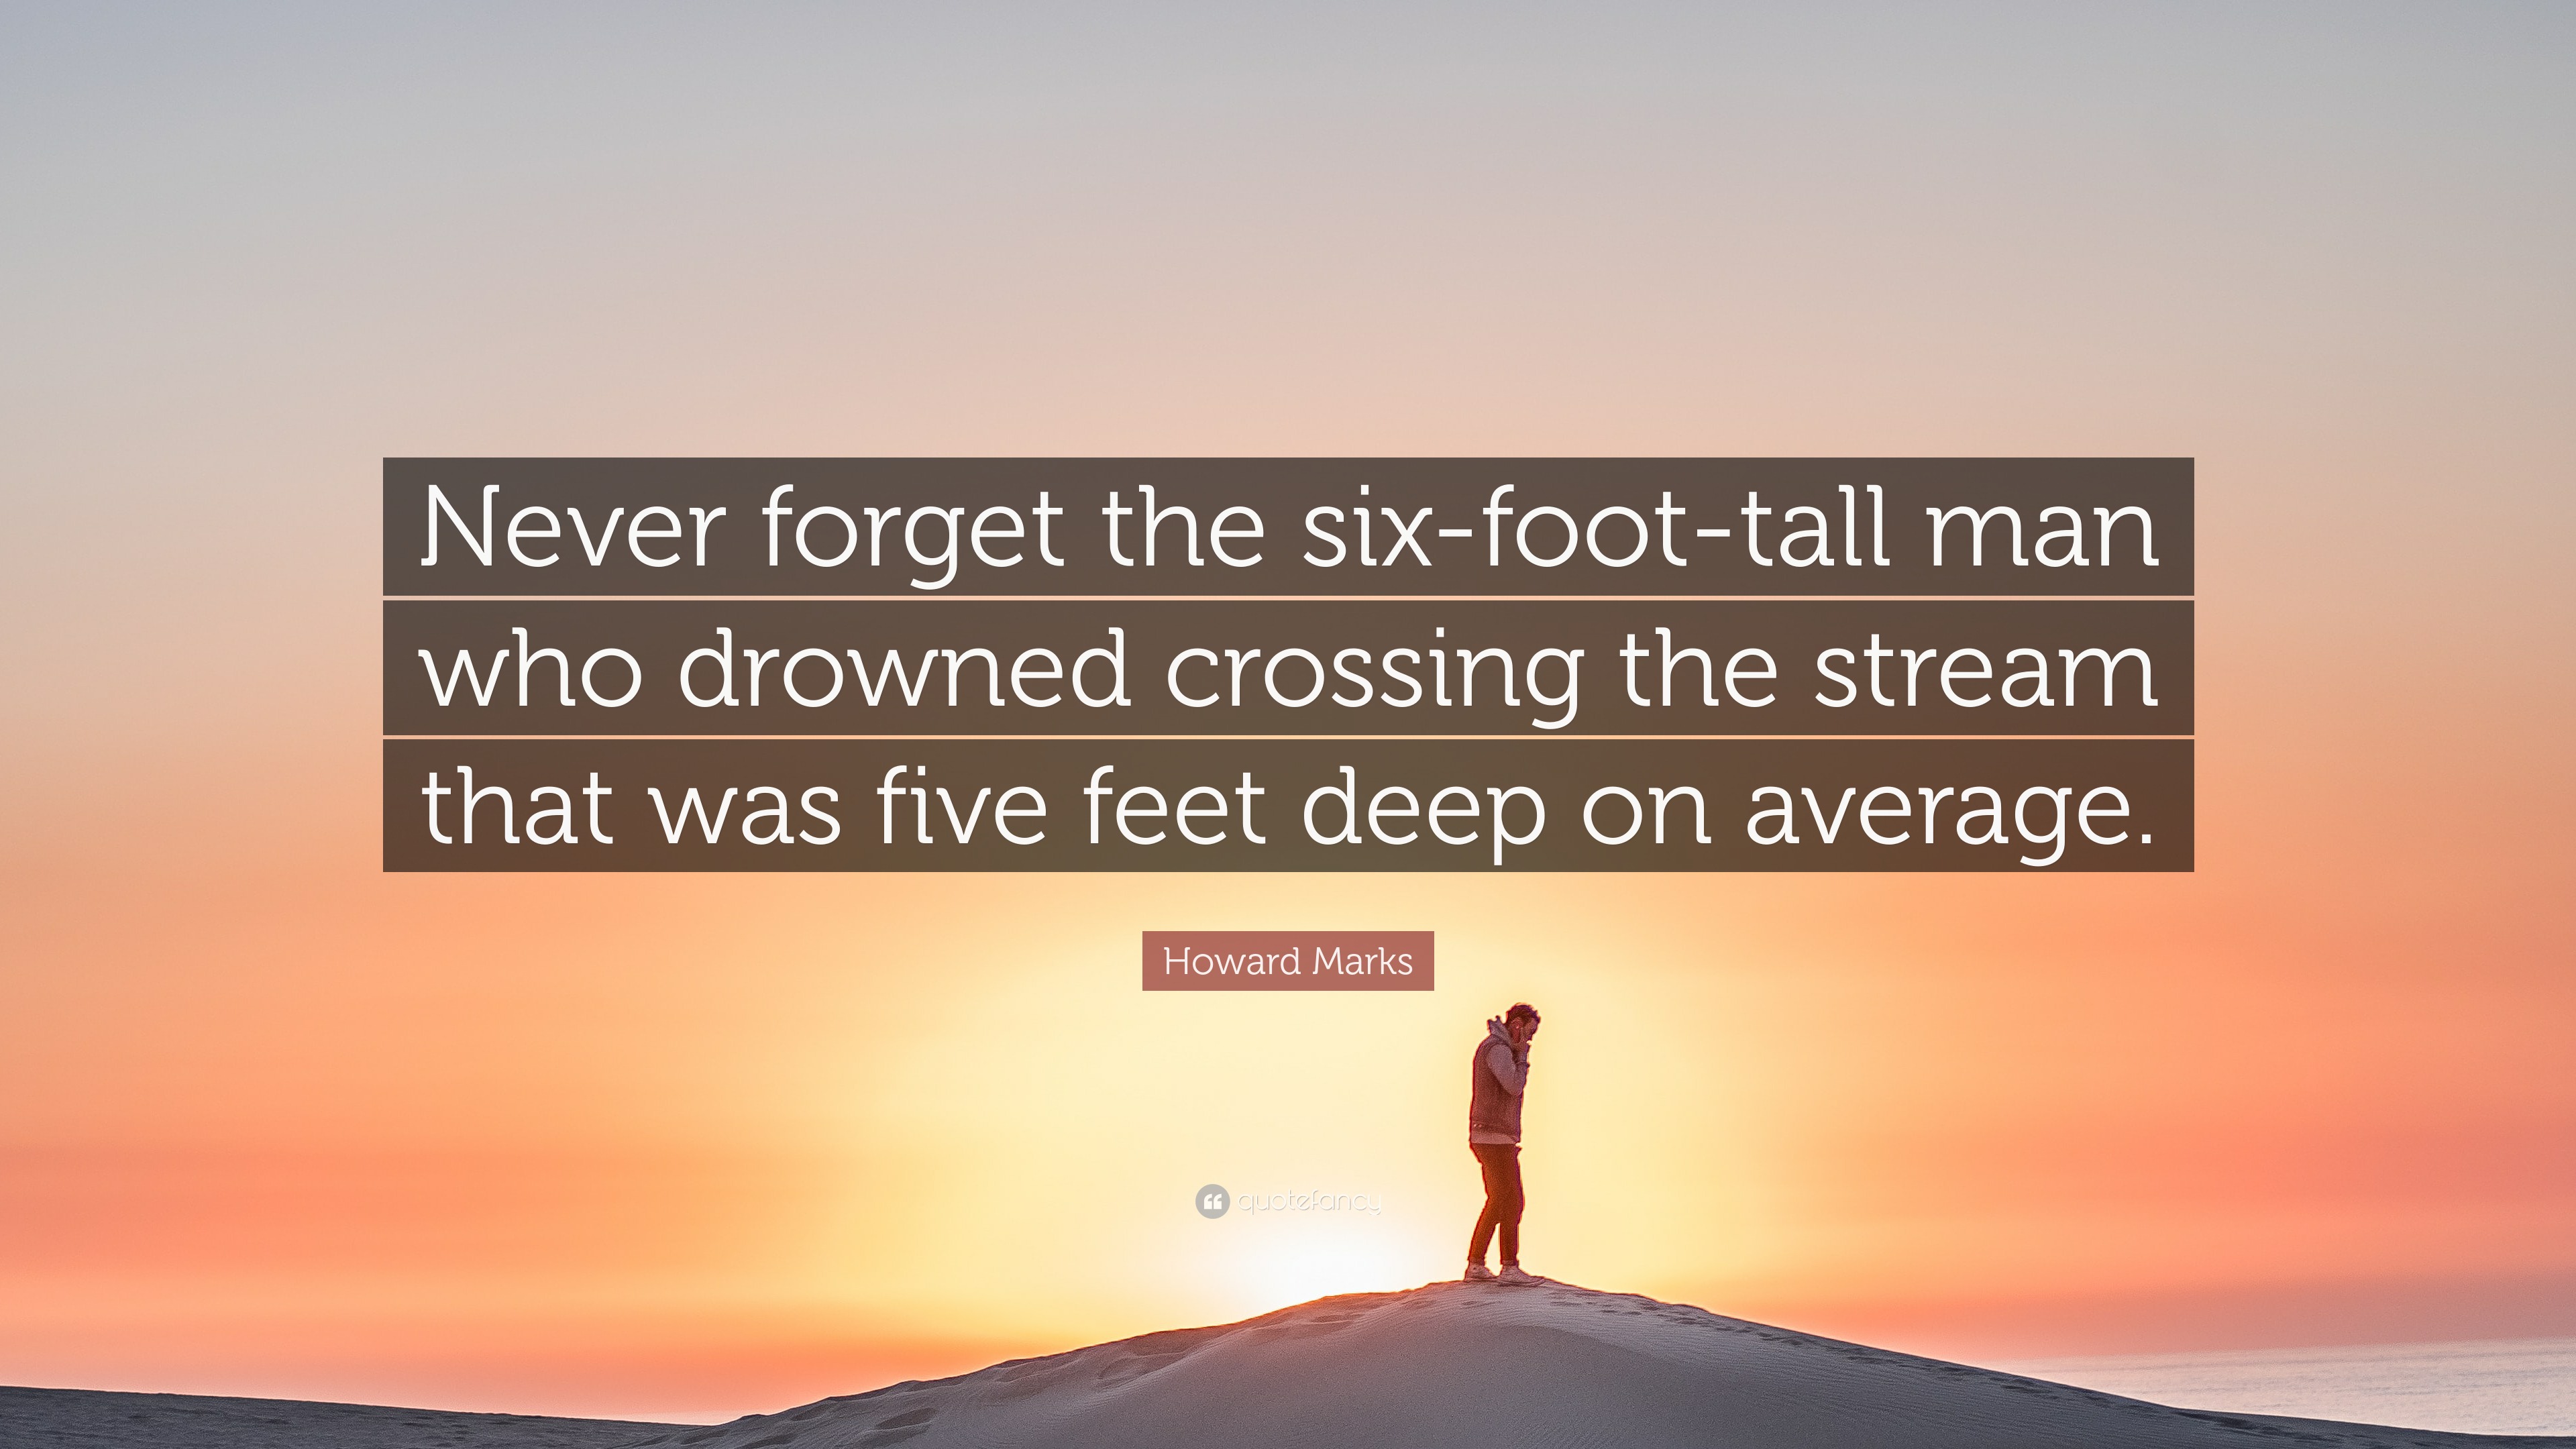 https://quotefancy.com/media/wallpaper/3840x2160/7396242-Howard-Marks-Quote-Never-forget-the-six-foot-tall-man-who-drowned.jpg